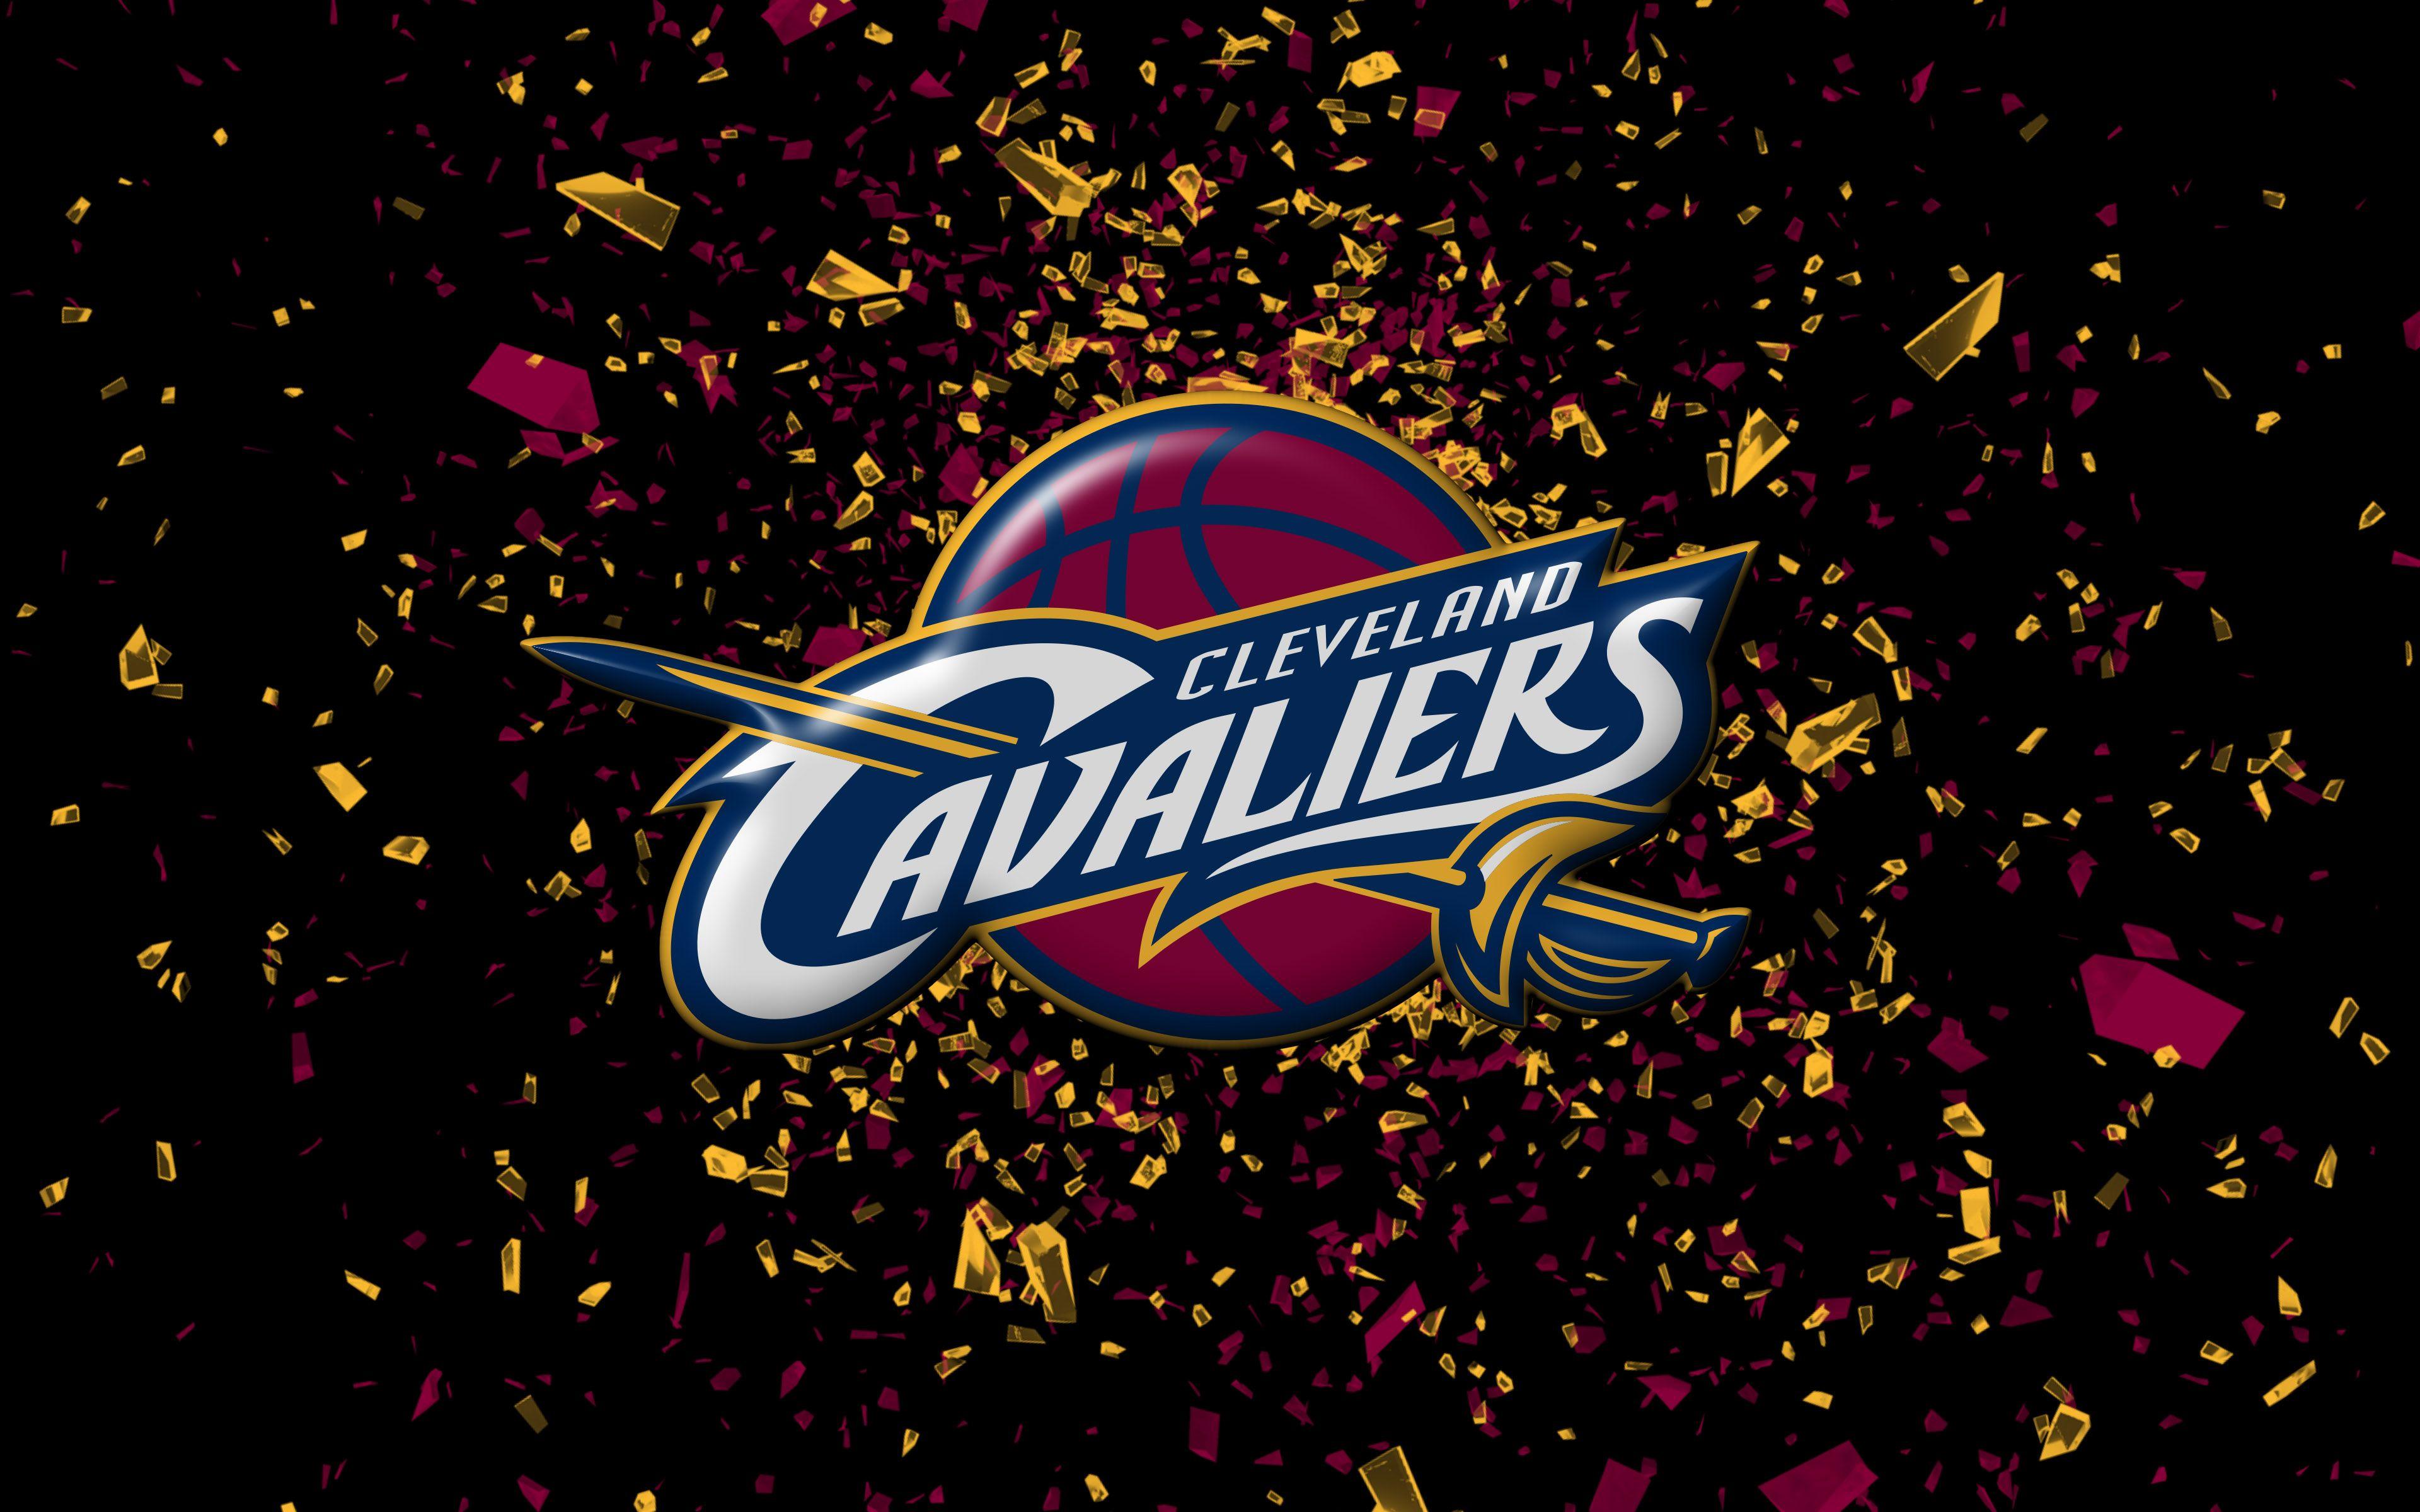 Cleveland Cavaliers 2014